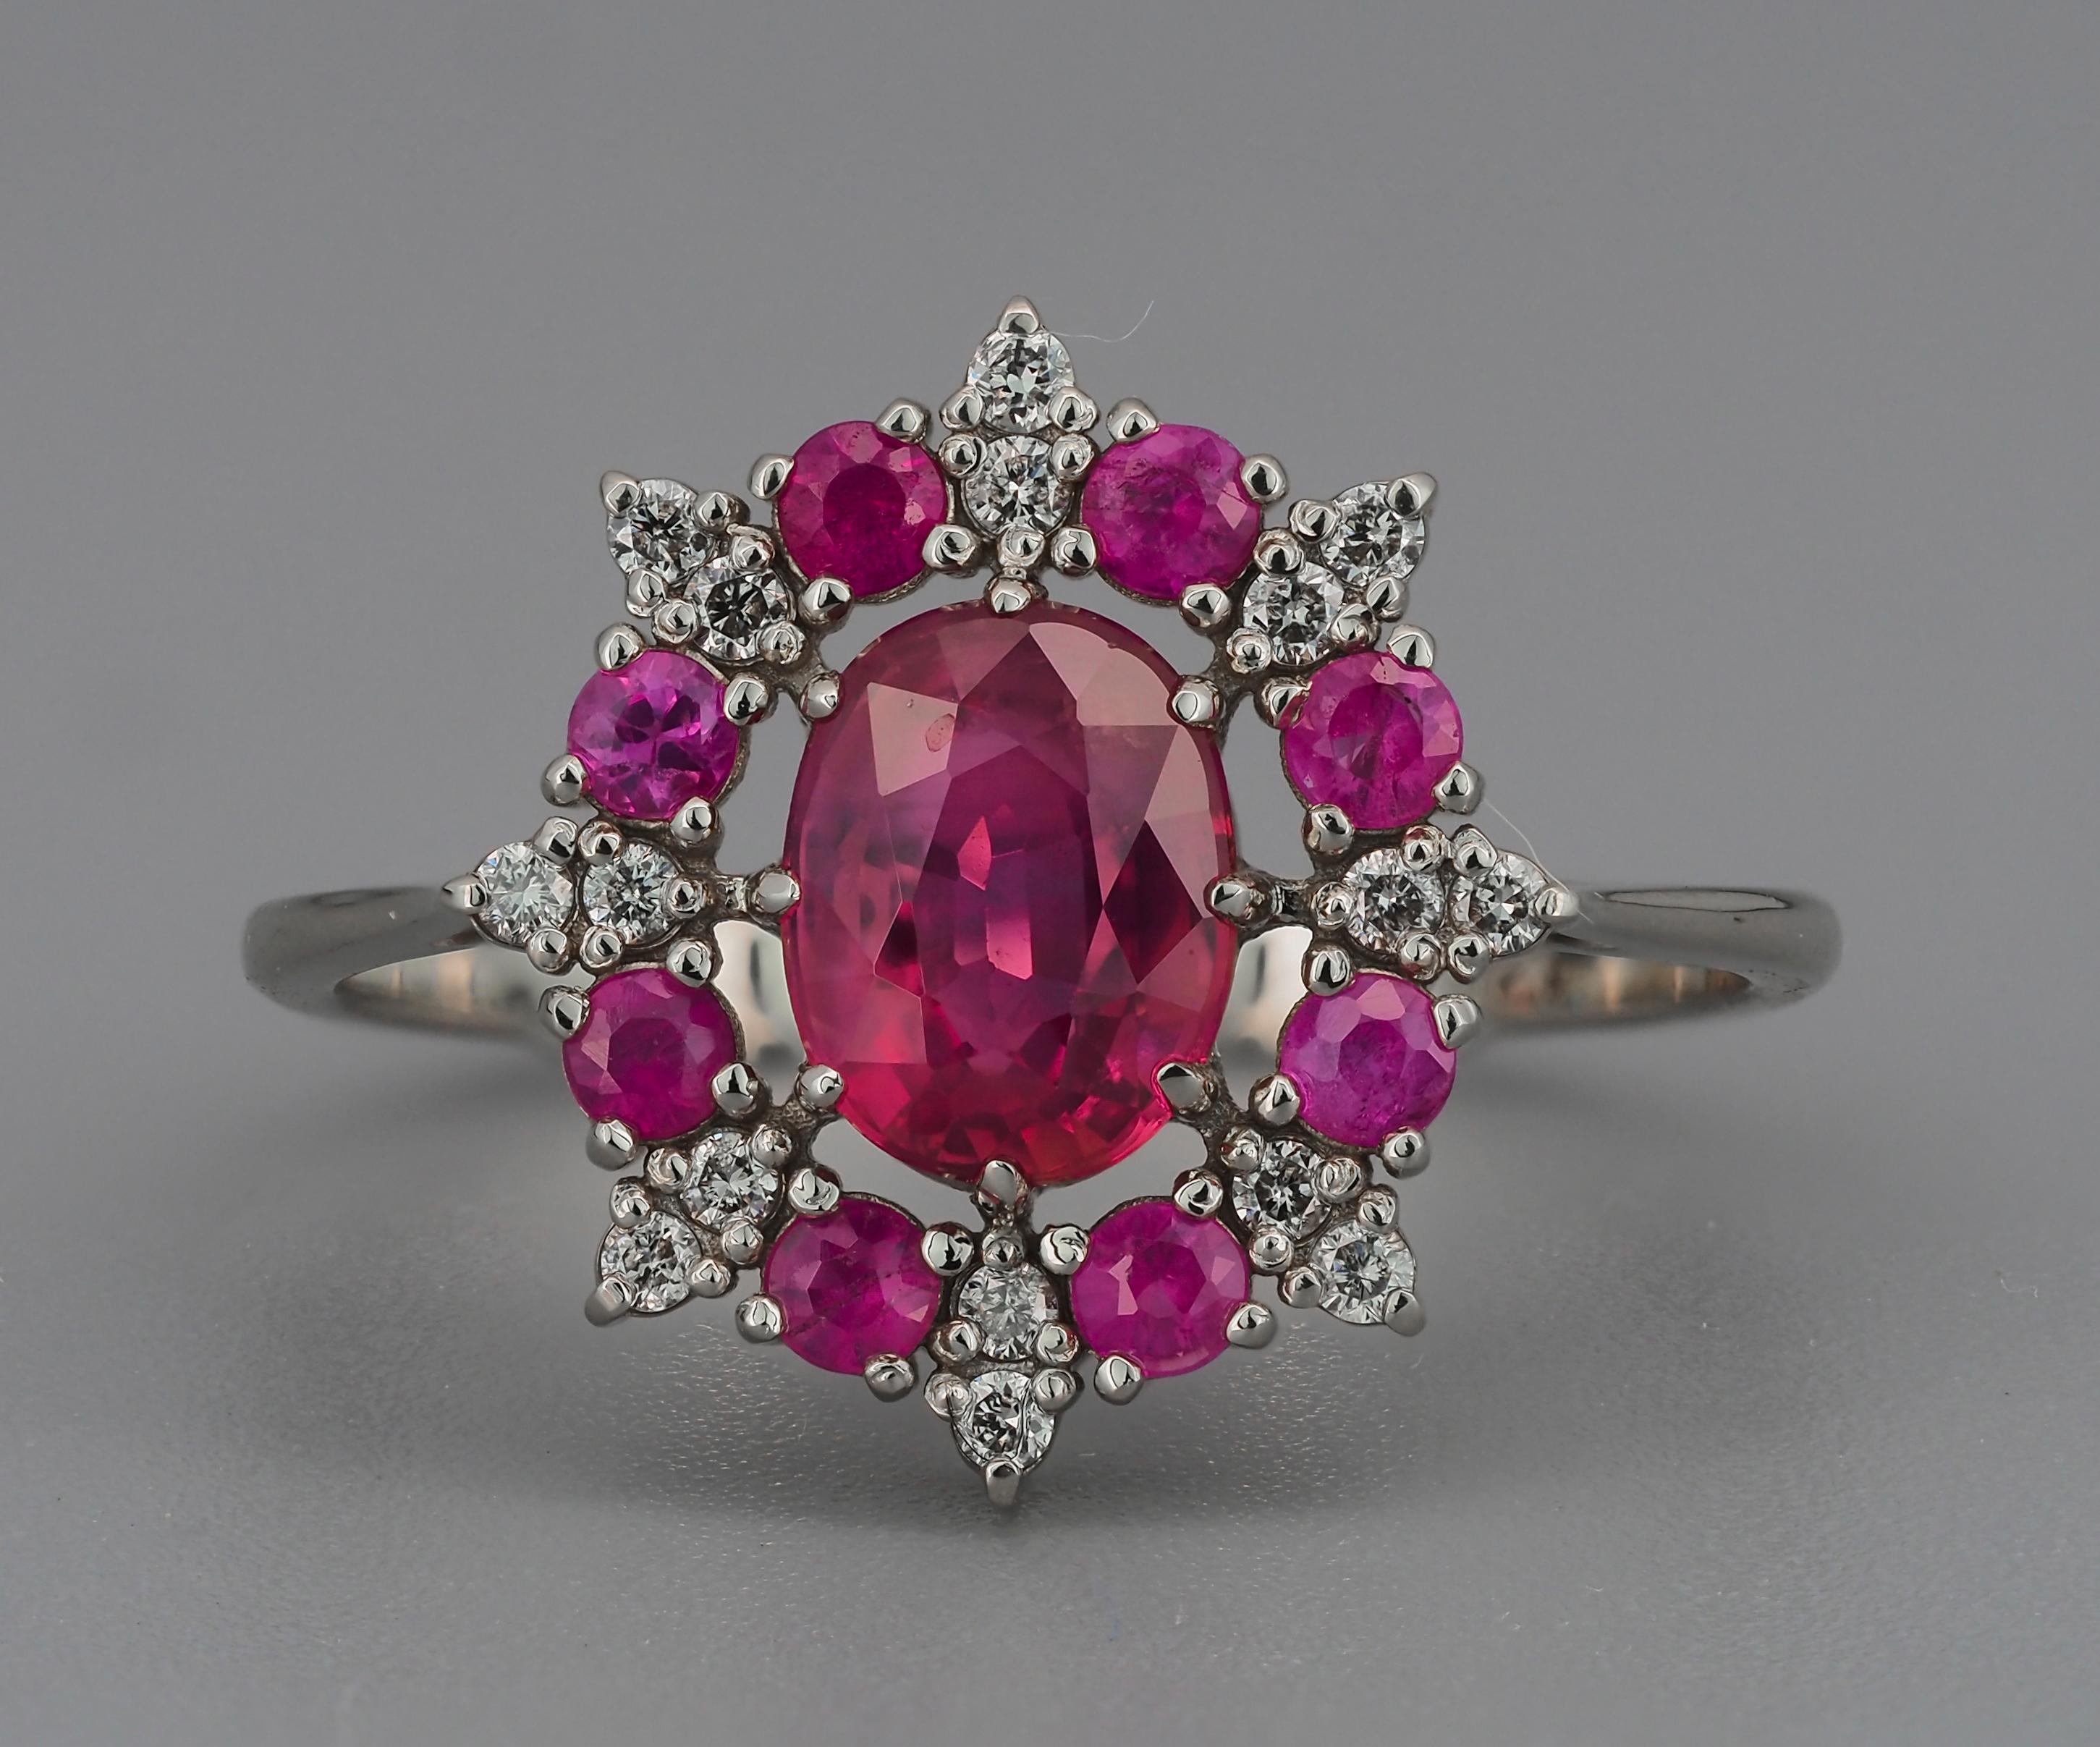 For Sale:  14 karat Gold Ring with Ruby and Diamonds. Snowflake Gold Ring 5